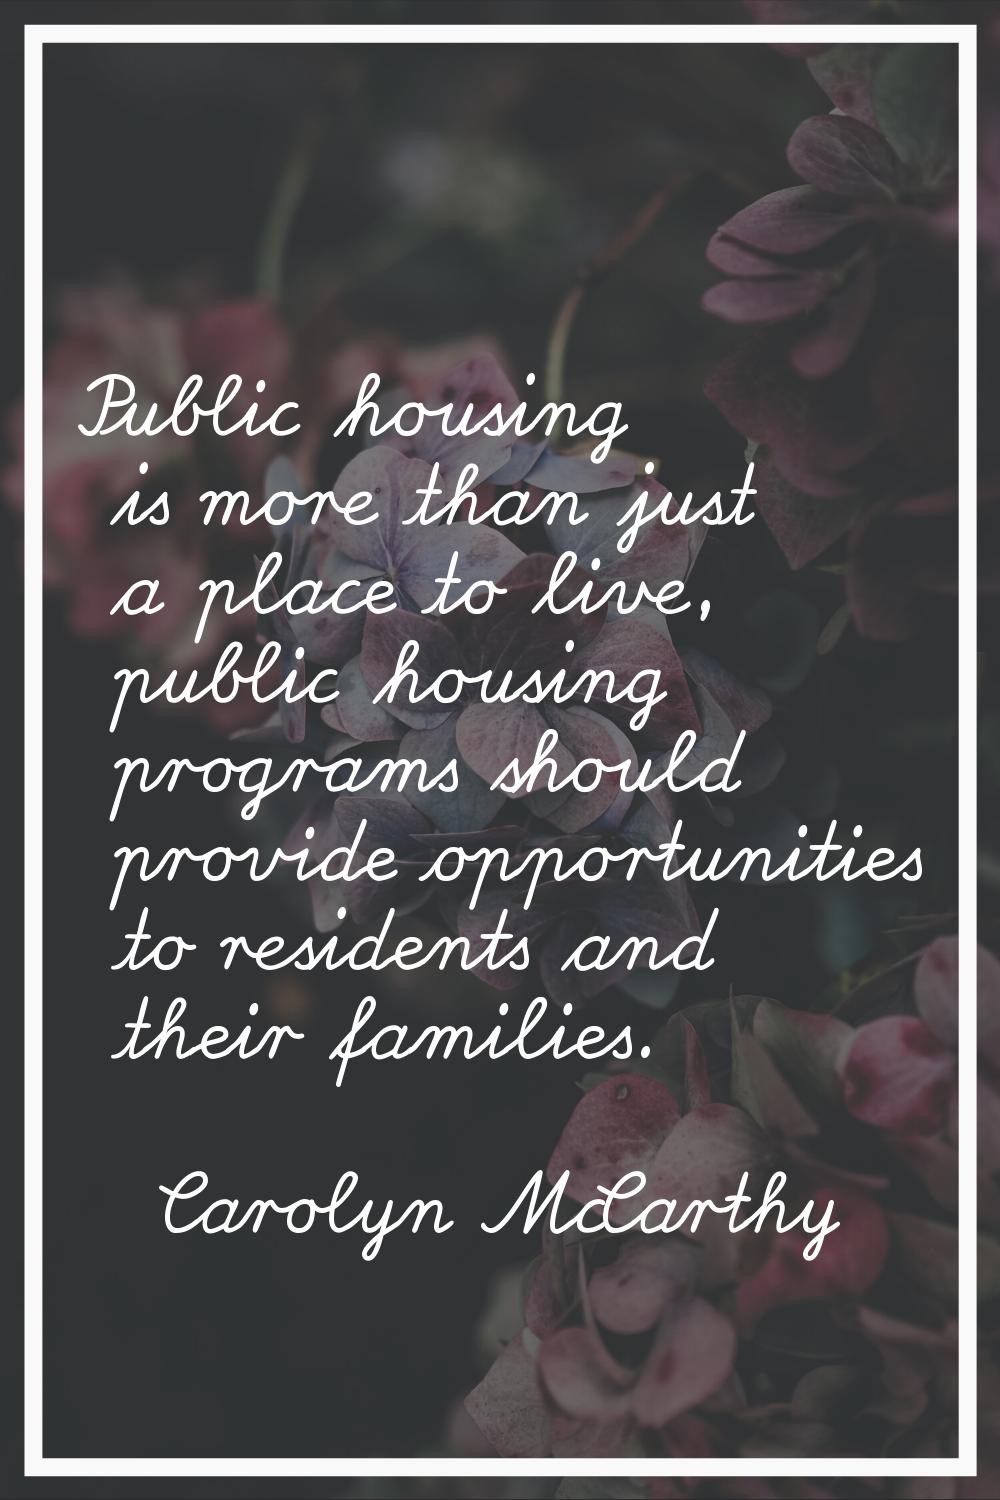 Public housing is more than just a place to live, public housing programs should provide opportunit